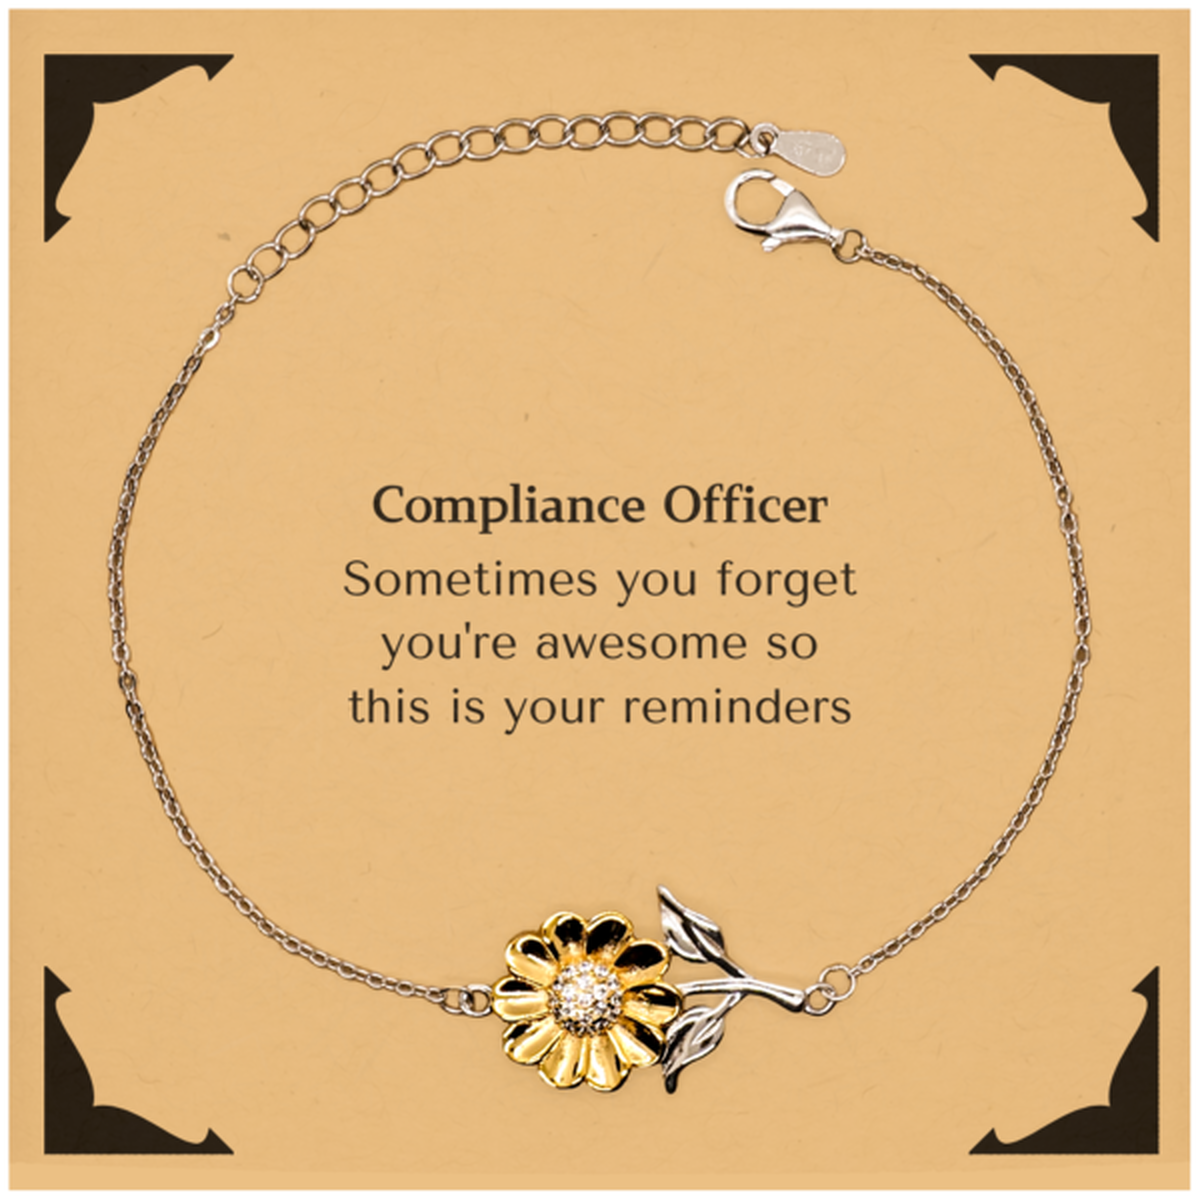 Sentimental Compliance Officer Sunflower Bracelet, Compliance Officer Sometimes you forget you're awesome so this is your reminders, Graduation Christmas Birthday Gifts for Compliance Officer, Men, Women, Coworkers